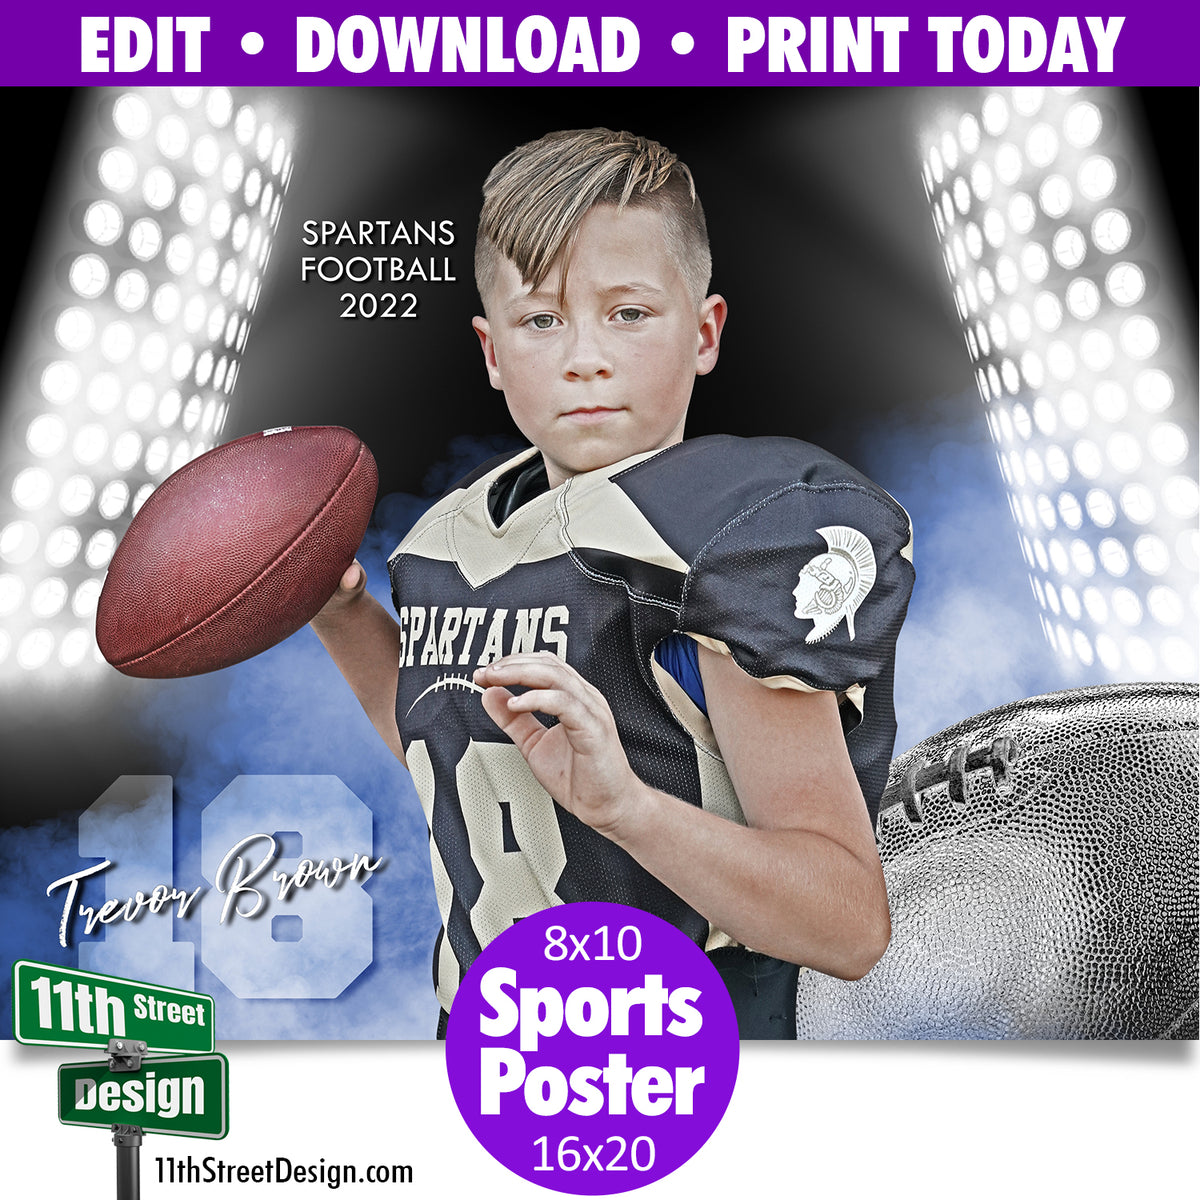 Sports Poster • Edit Now Online • Print Today • Digital Download • Custom Sports Photo • Senior Day Night Poster • Smokey Lights Football Template